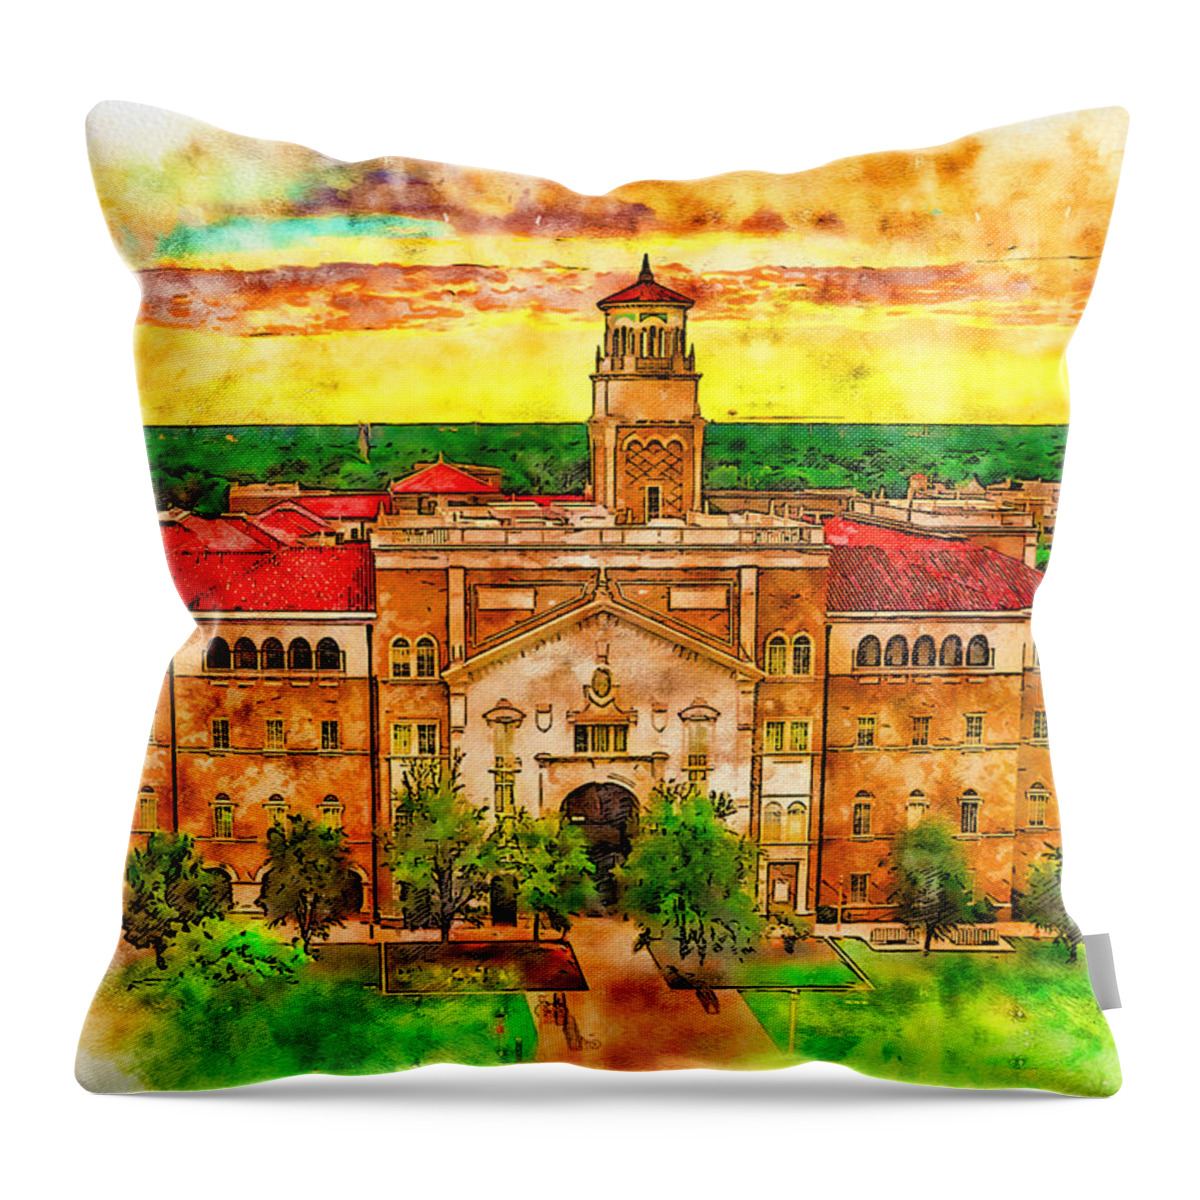 English And Philosophy Building Throw Pillow featuring the digital art The English and Philosophy Building of the Texas Tech University - pen and watercolor by Nicko Prints